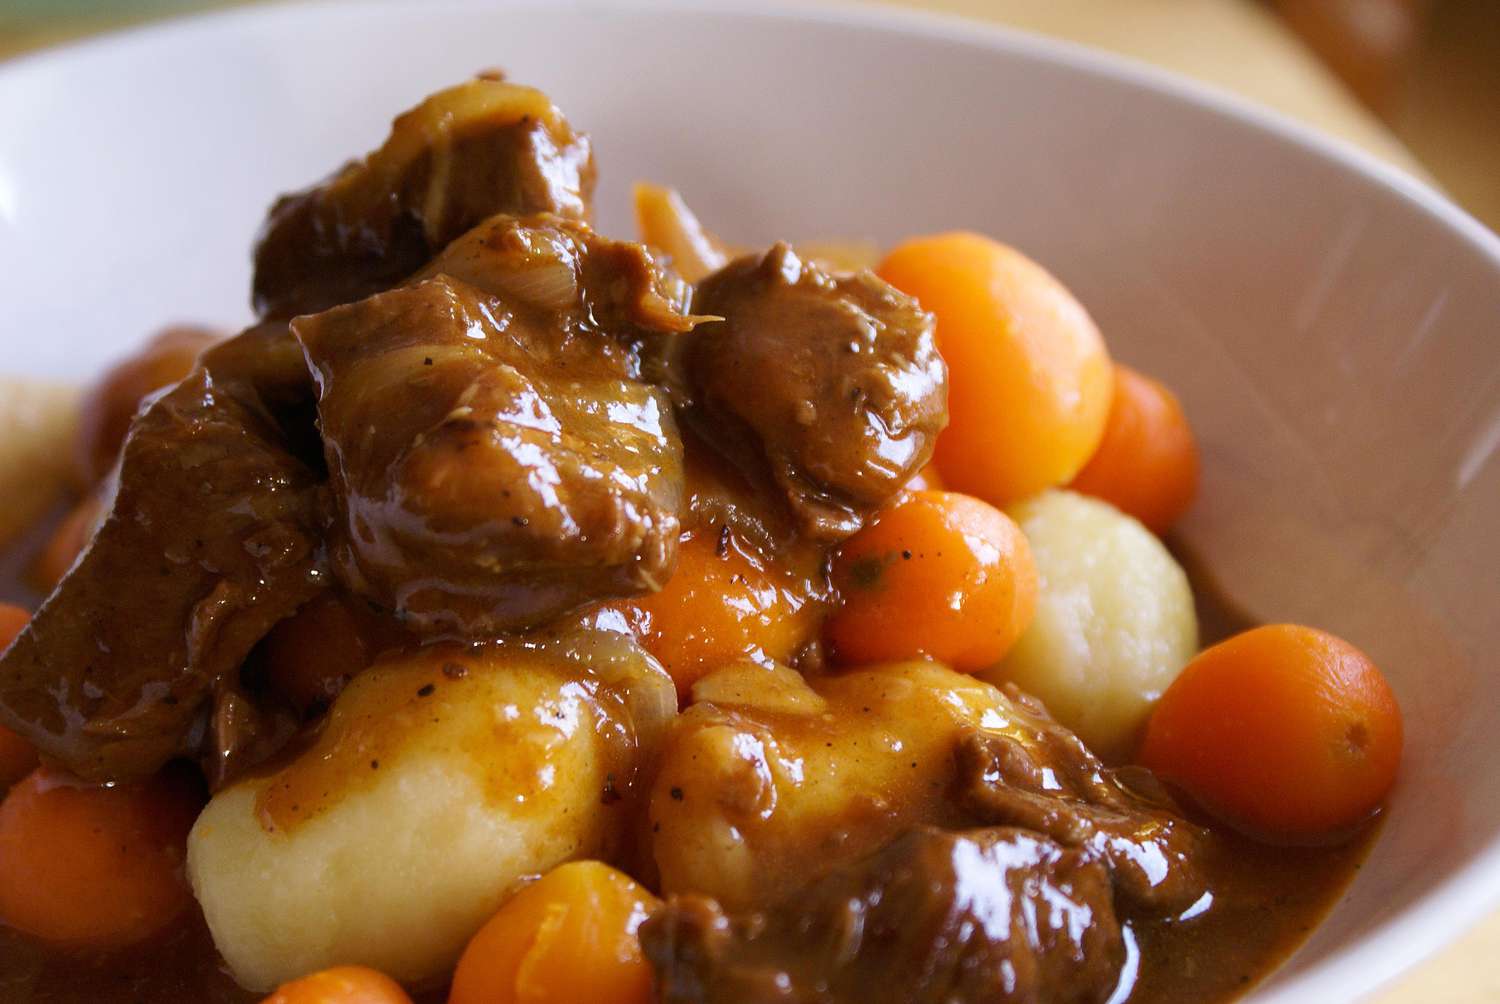 Beef stew with small dumplings and carrots